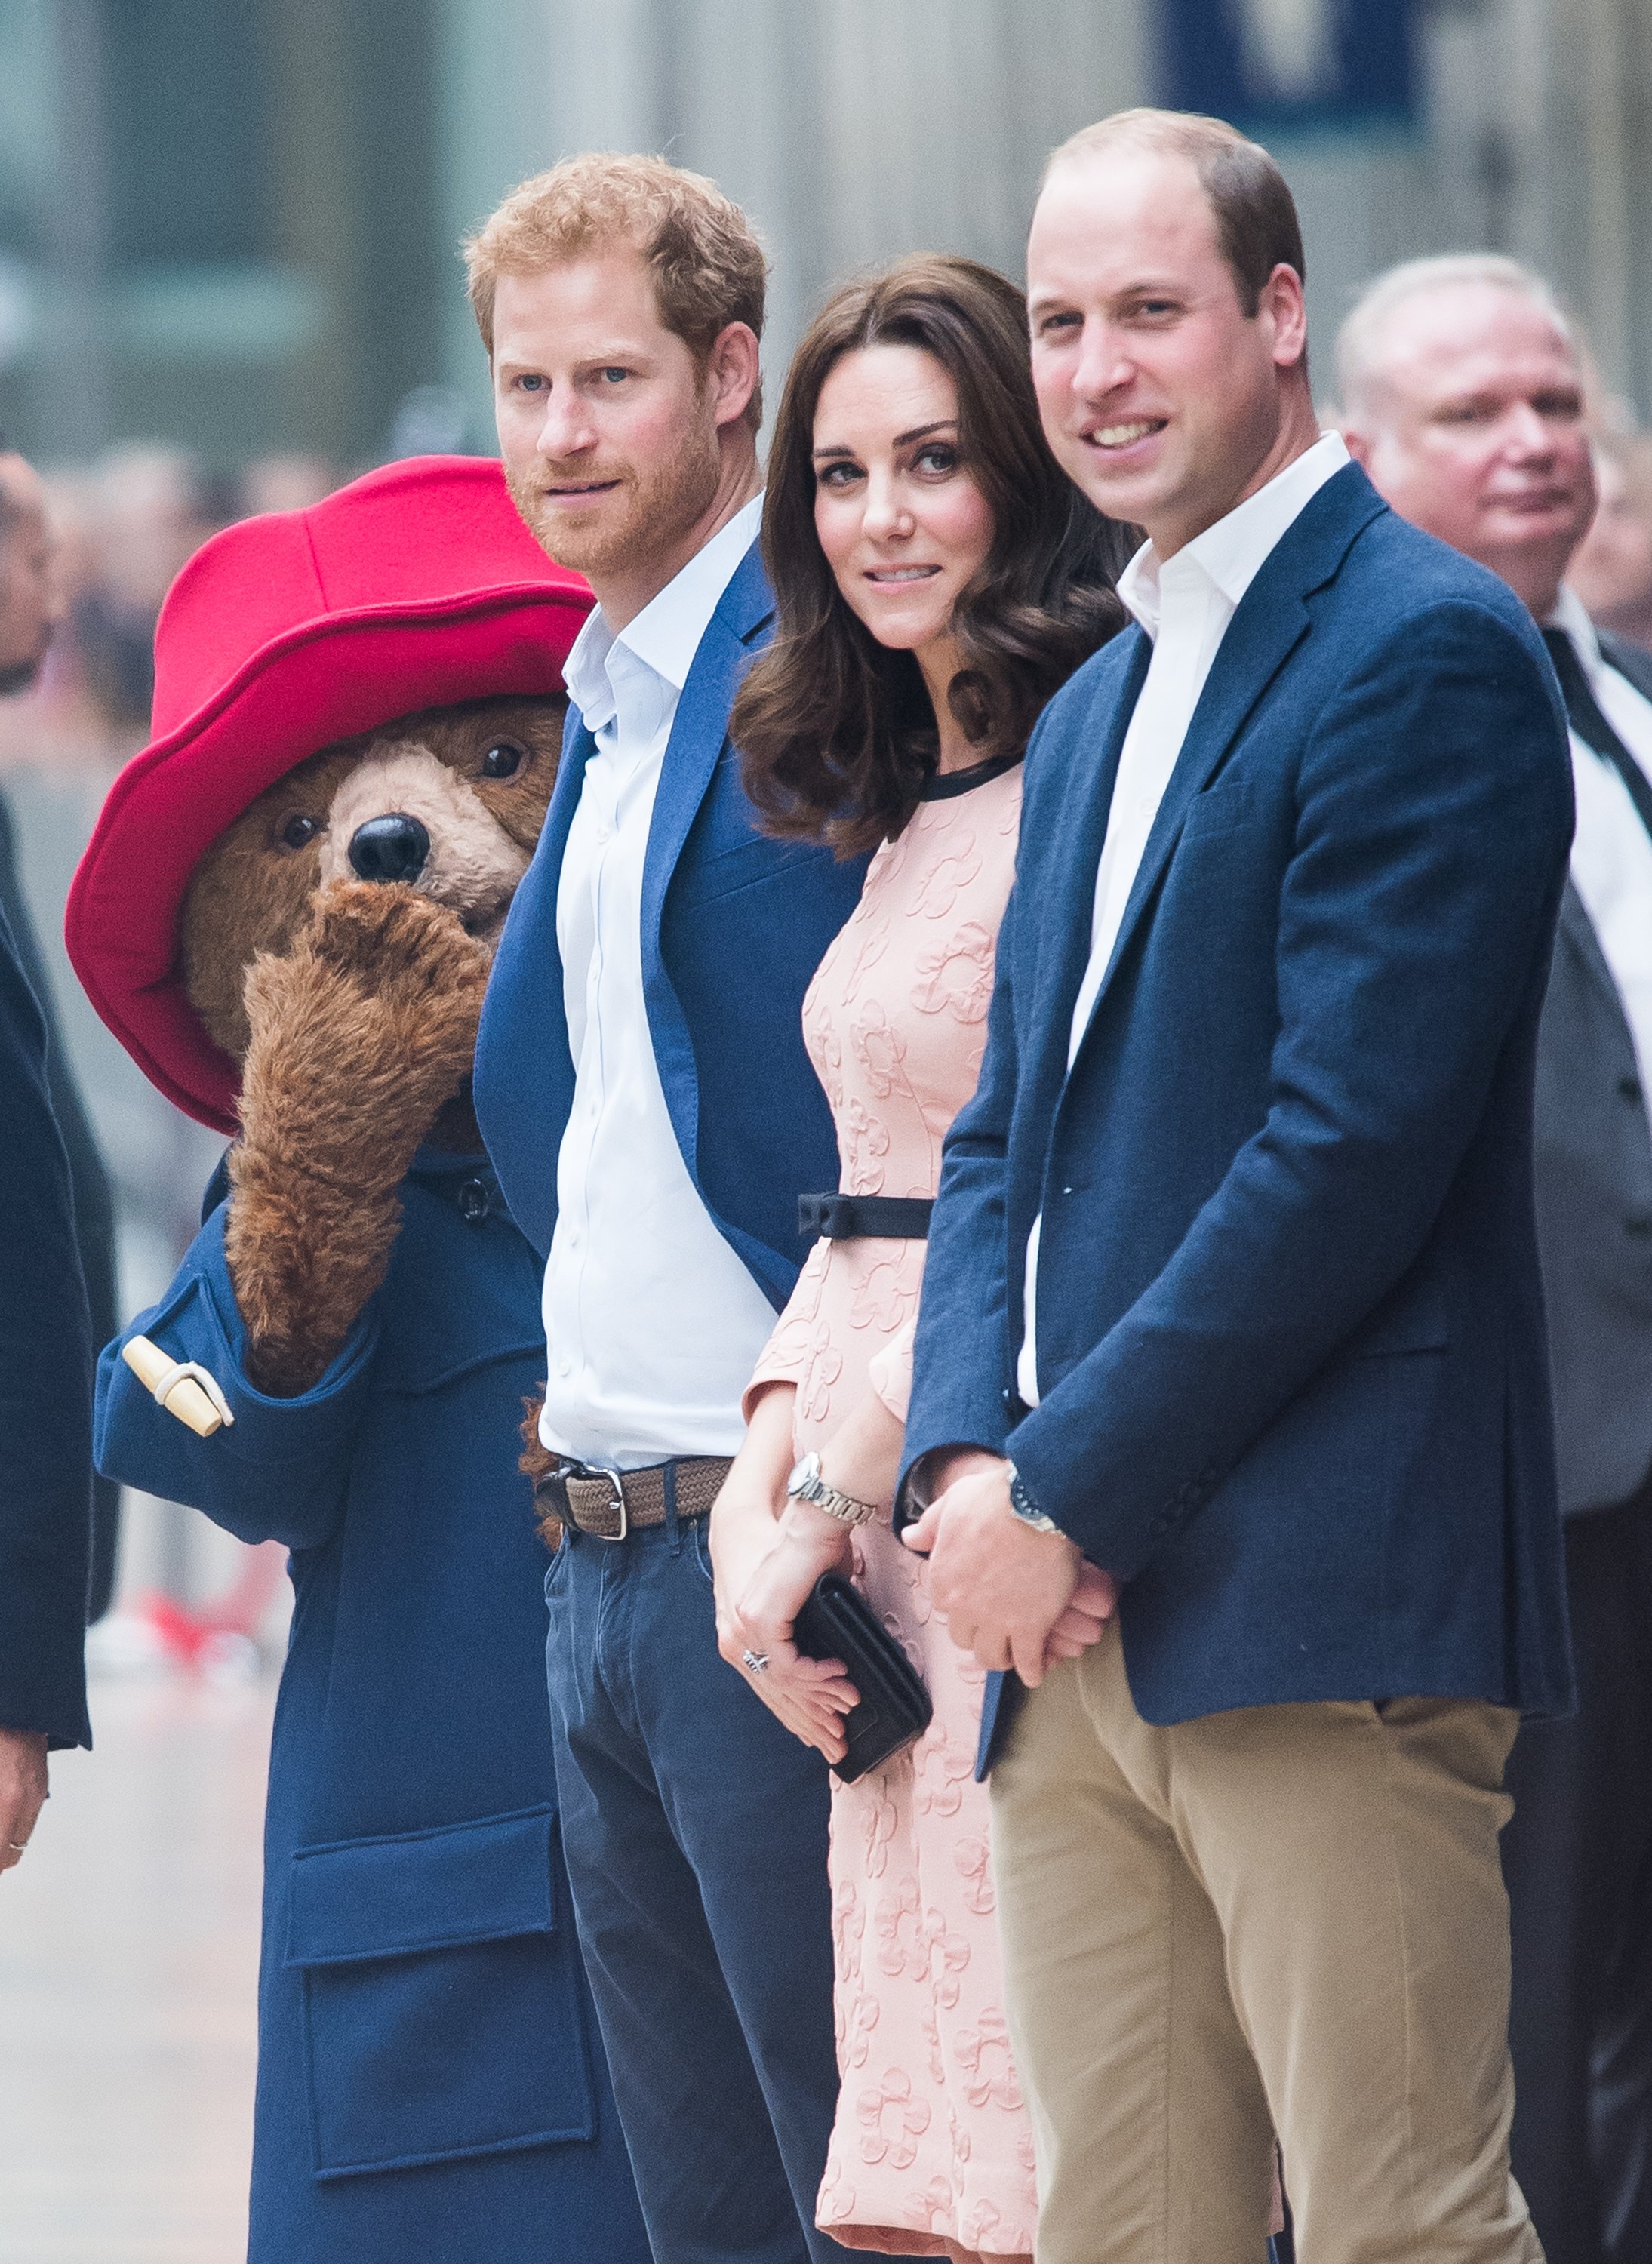 Paddington Bear, Prince Harry, Kate Middleton and Prince William during the Charities Forum Event at Paddington Station on October 16, 2017 in London, England./ Source: Getty Images